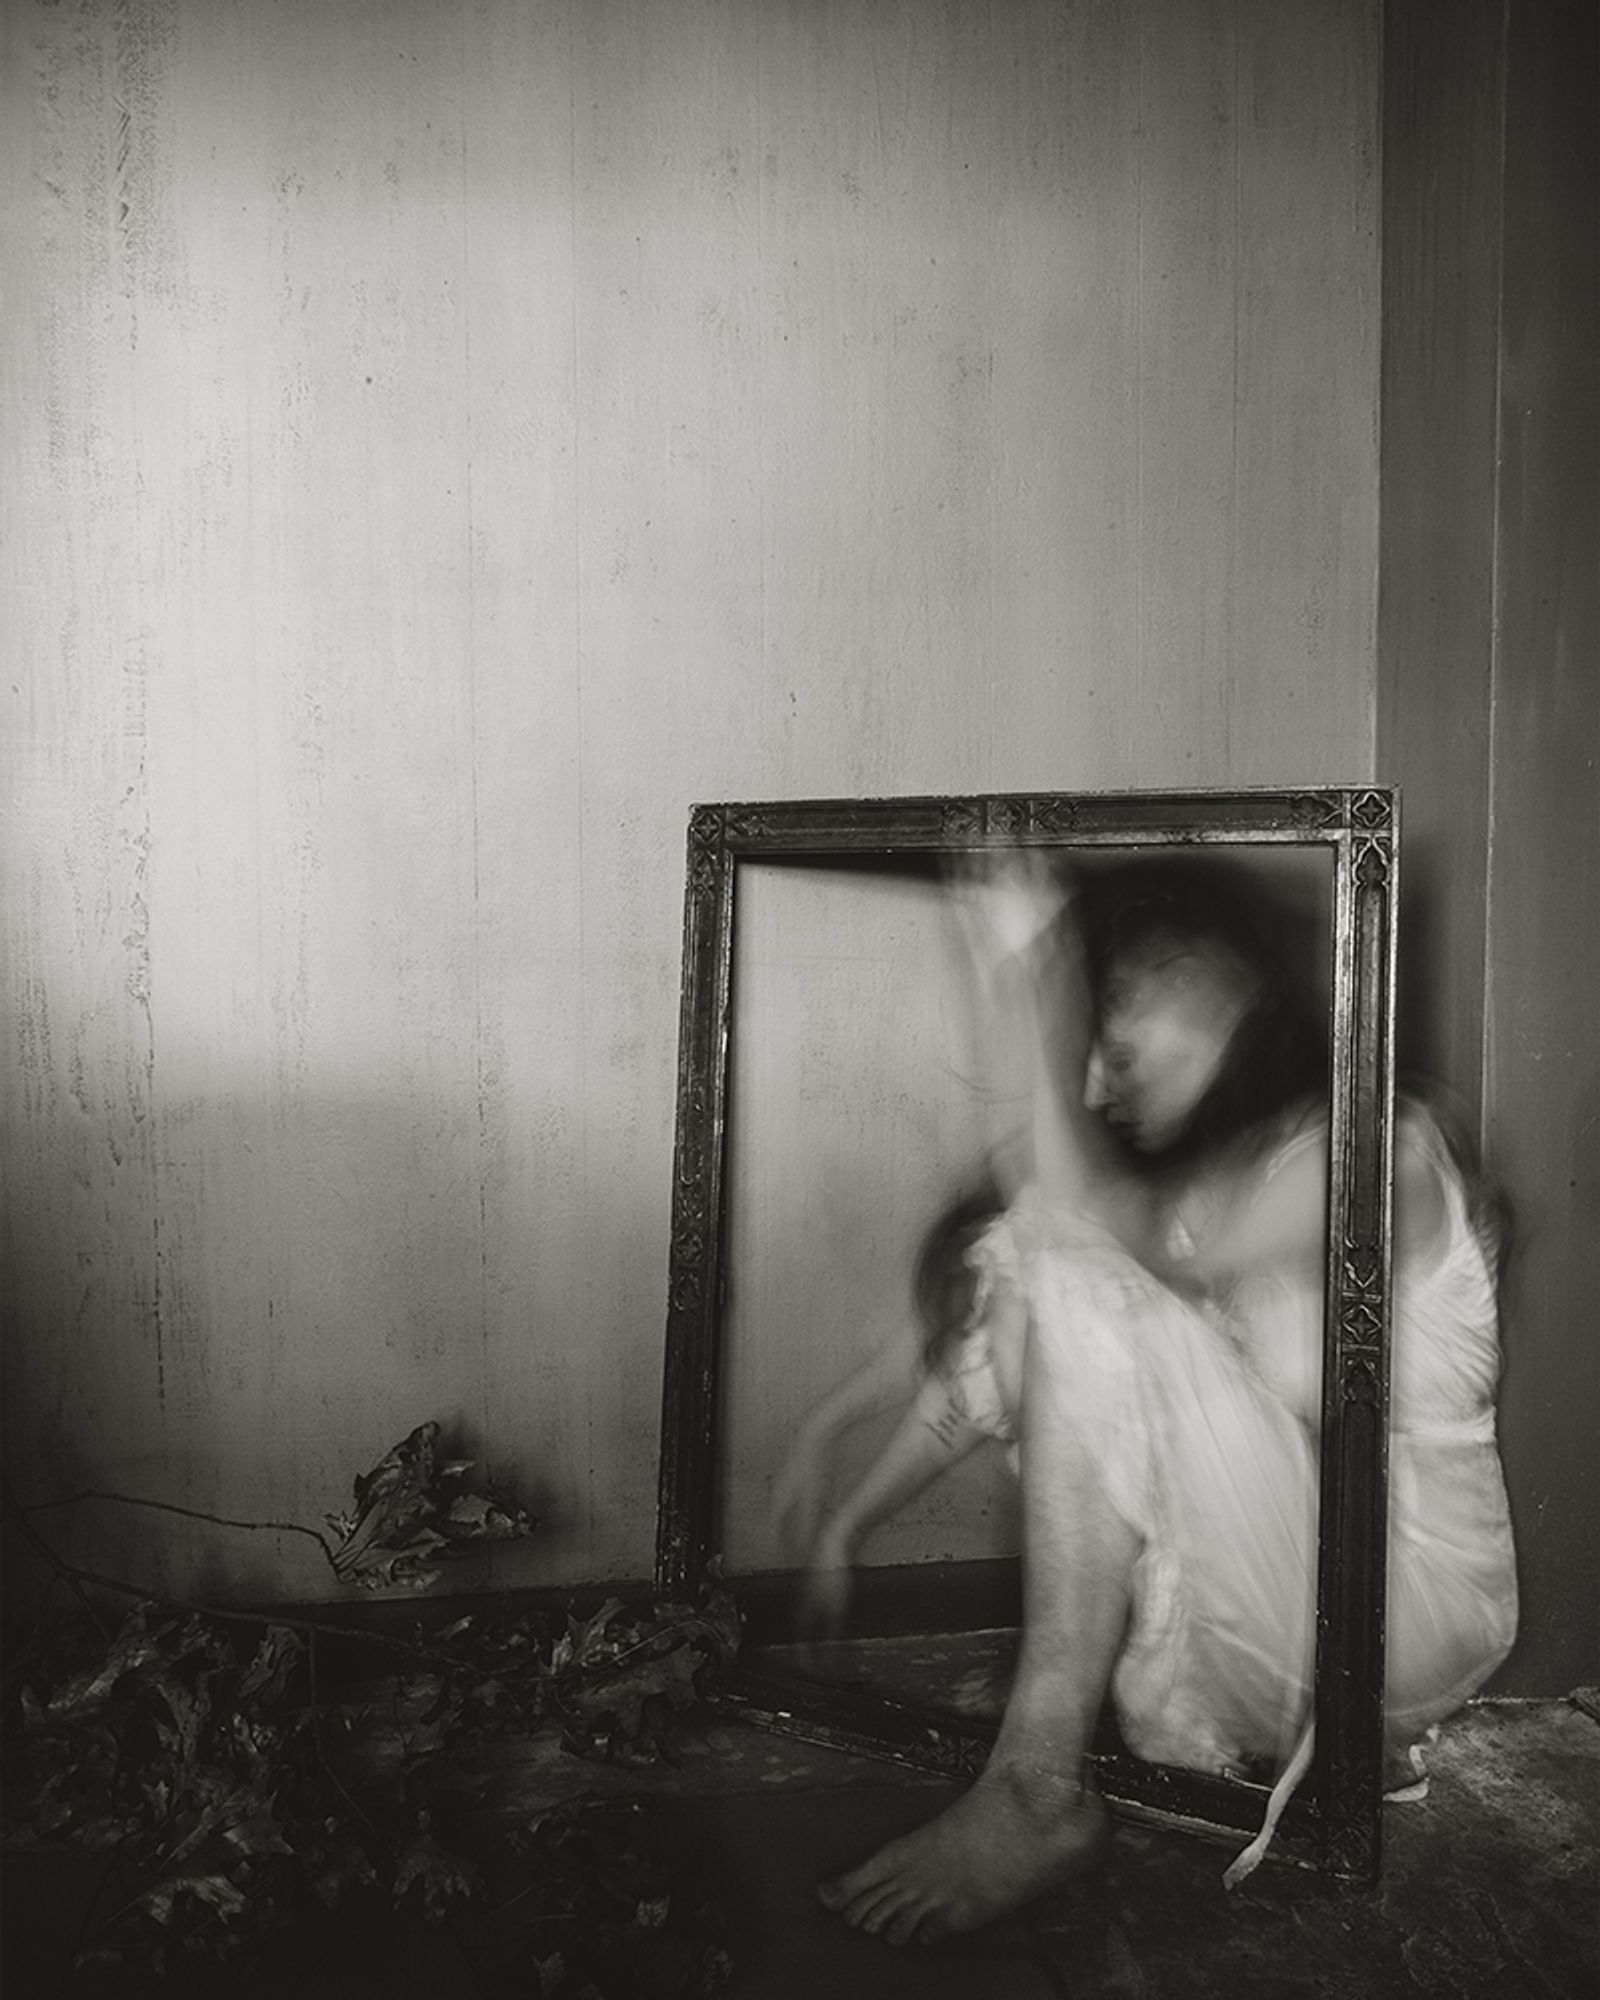 © Sarah Pezdek - Image from the The definitive moments i lost my mind photography project